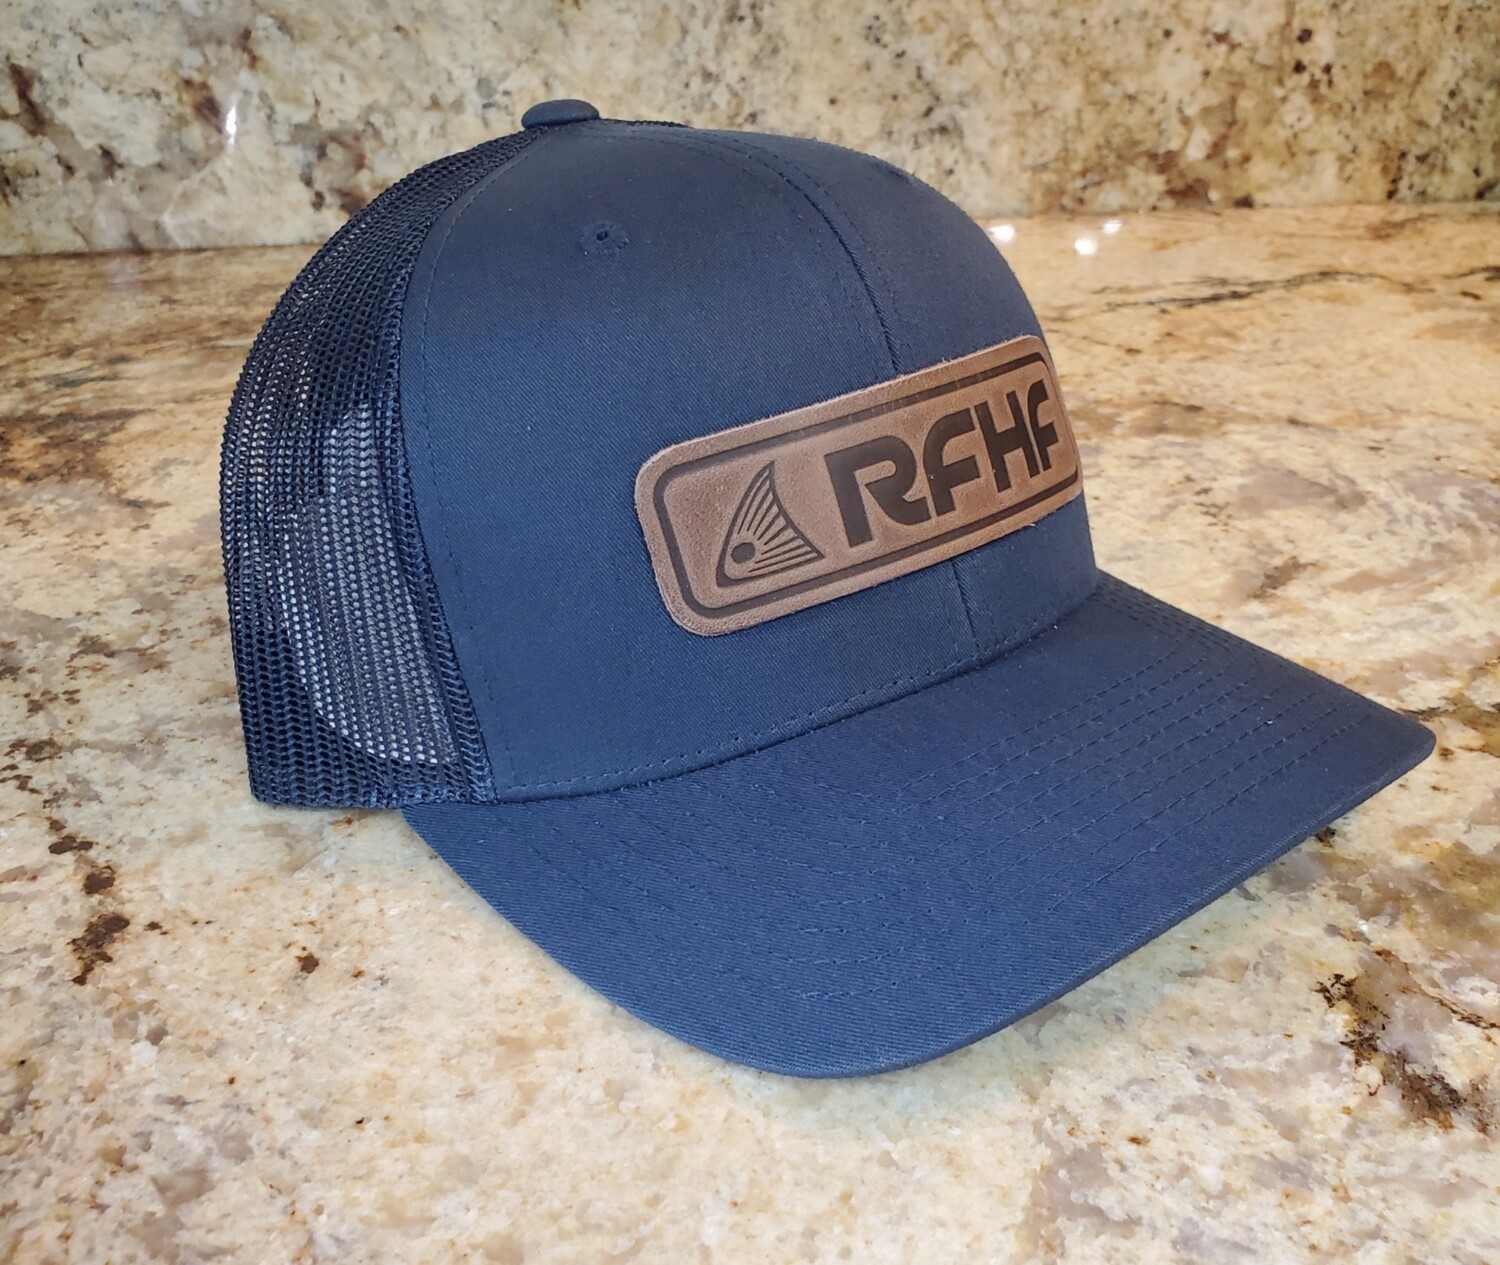 Leather redfish patch/navy hat